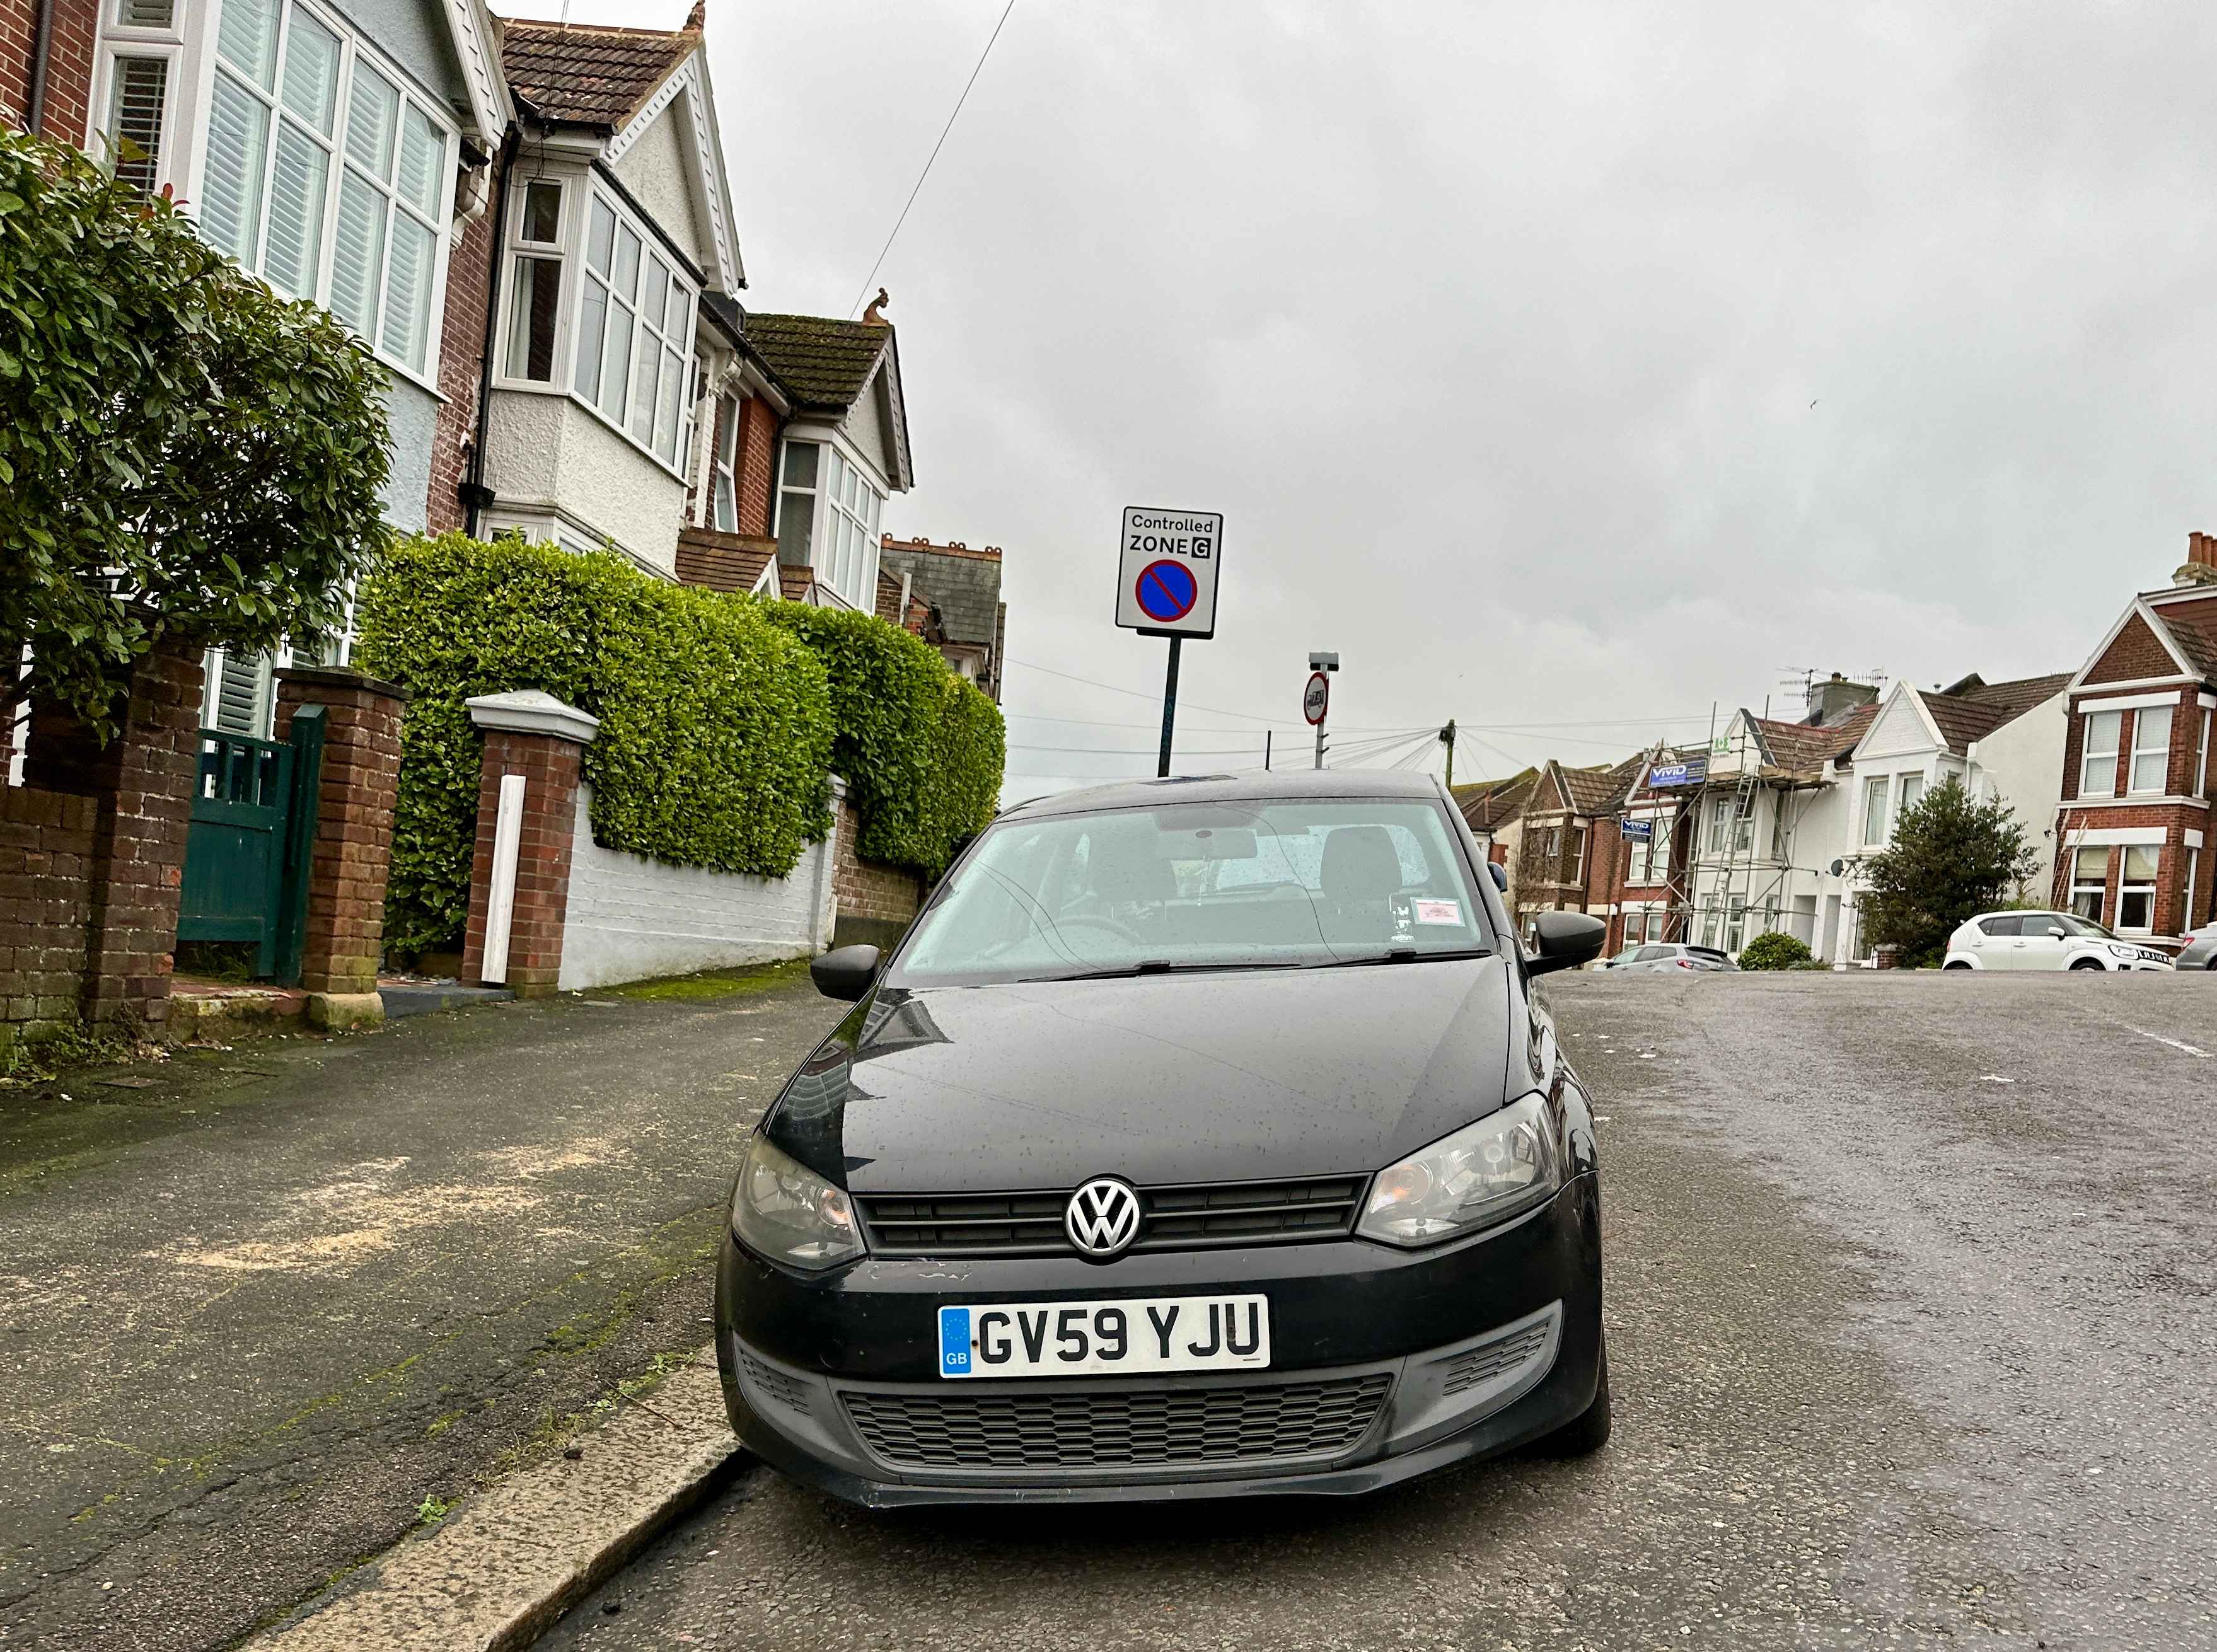 Photograph of GV59 YJU - a Black Volkswagen Polo parked in Hollingdean by a non-resident. The fourth of five photographs supplied by the residents of Hollingdean.